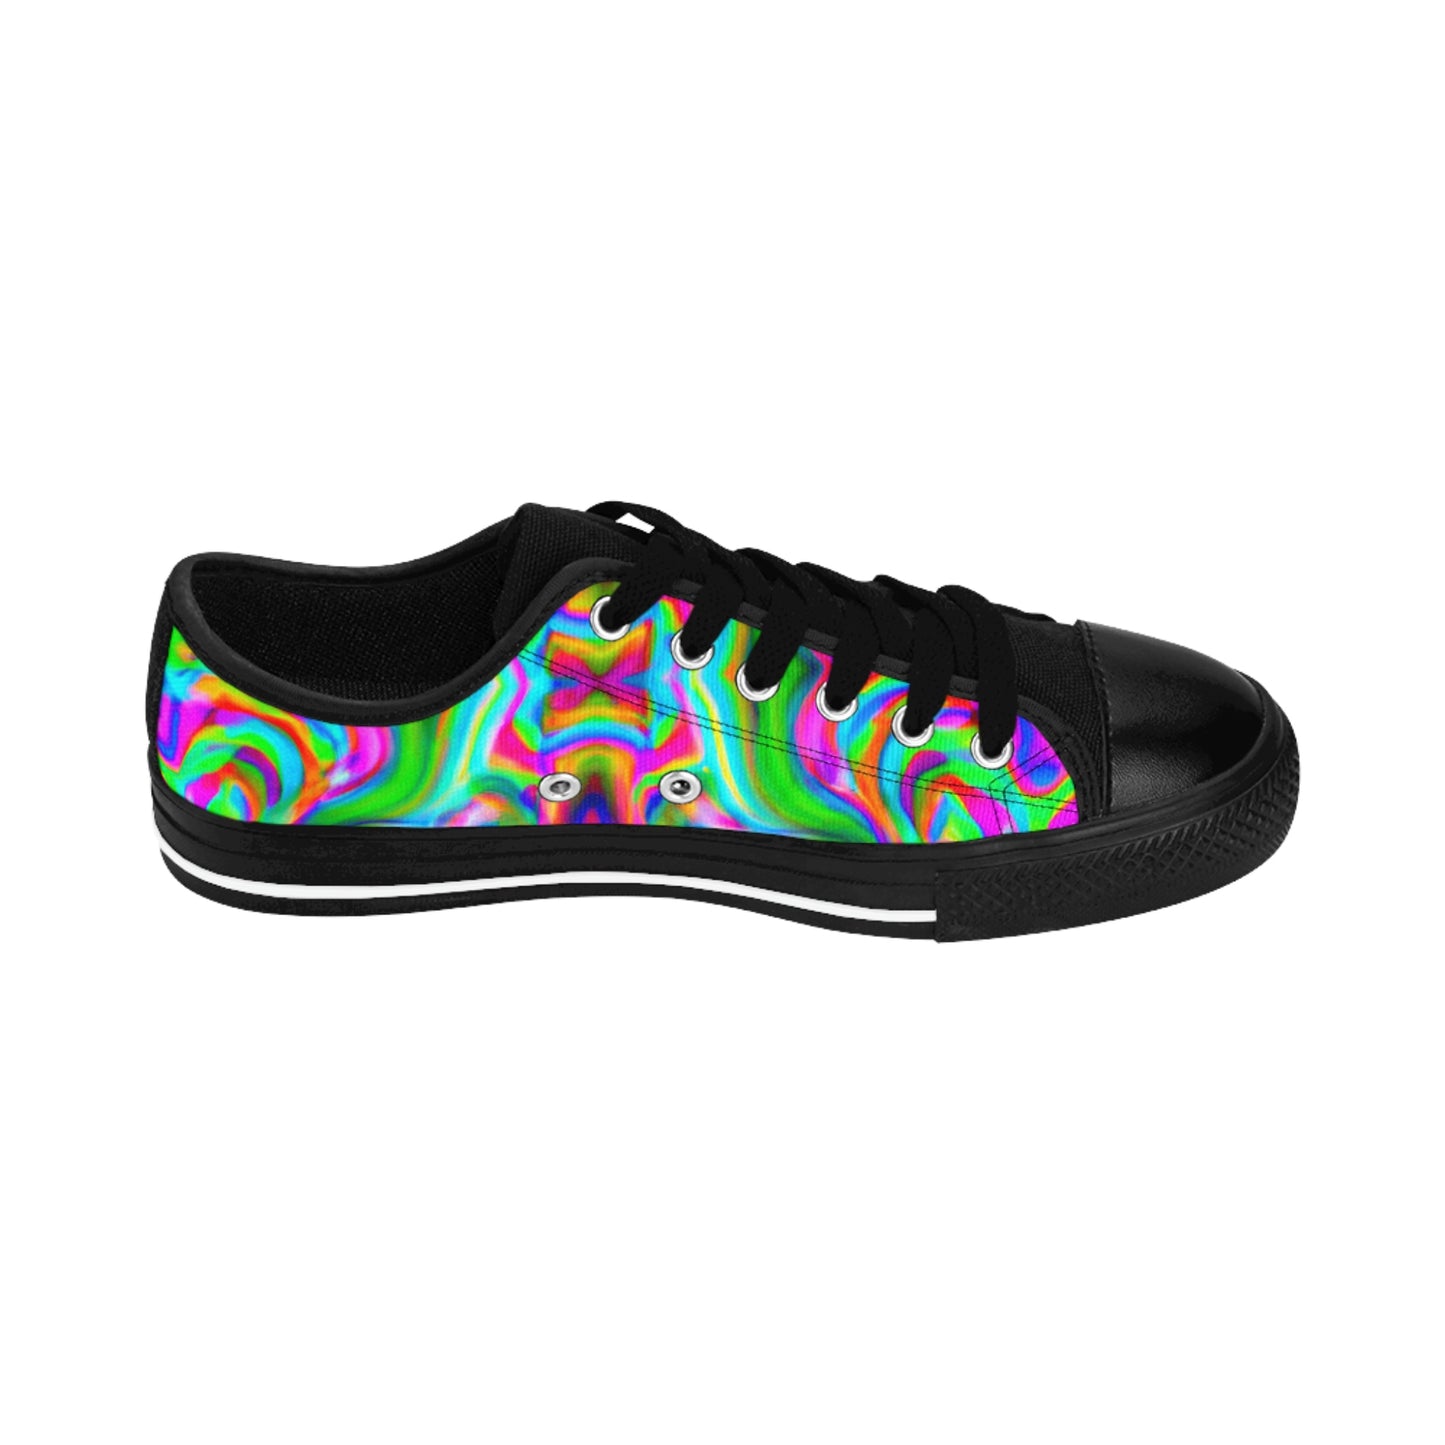 .

Fridolino the Shoe Maker - Psychedelic Low Top